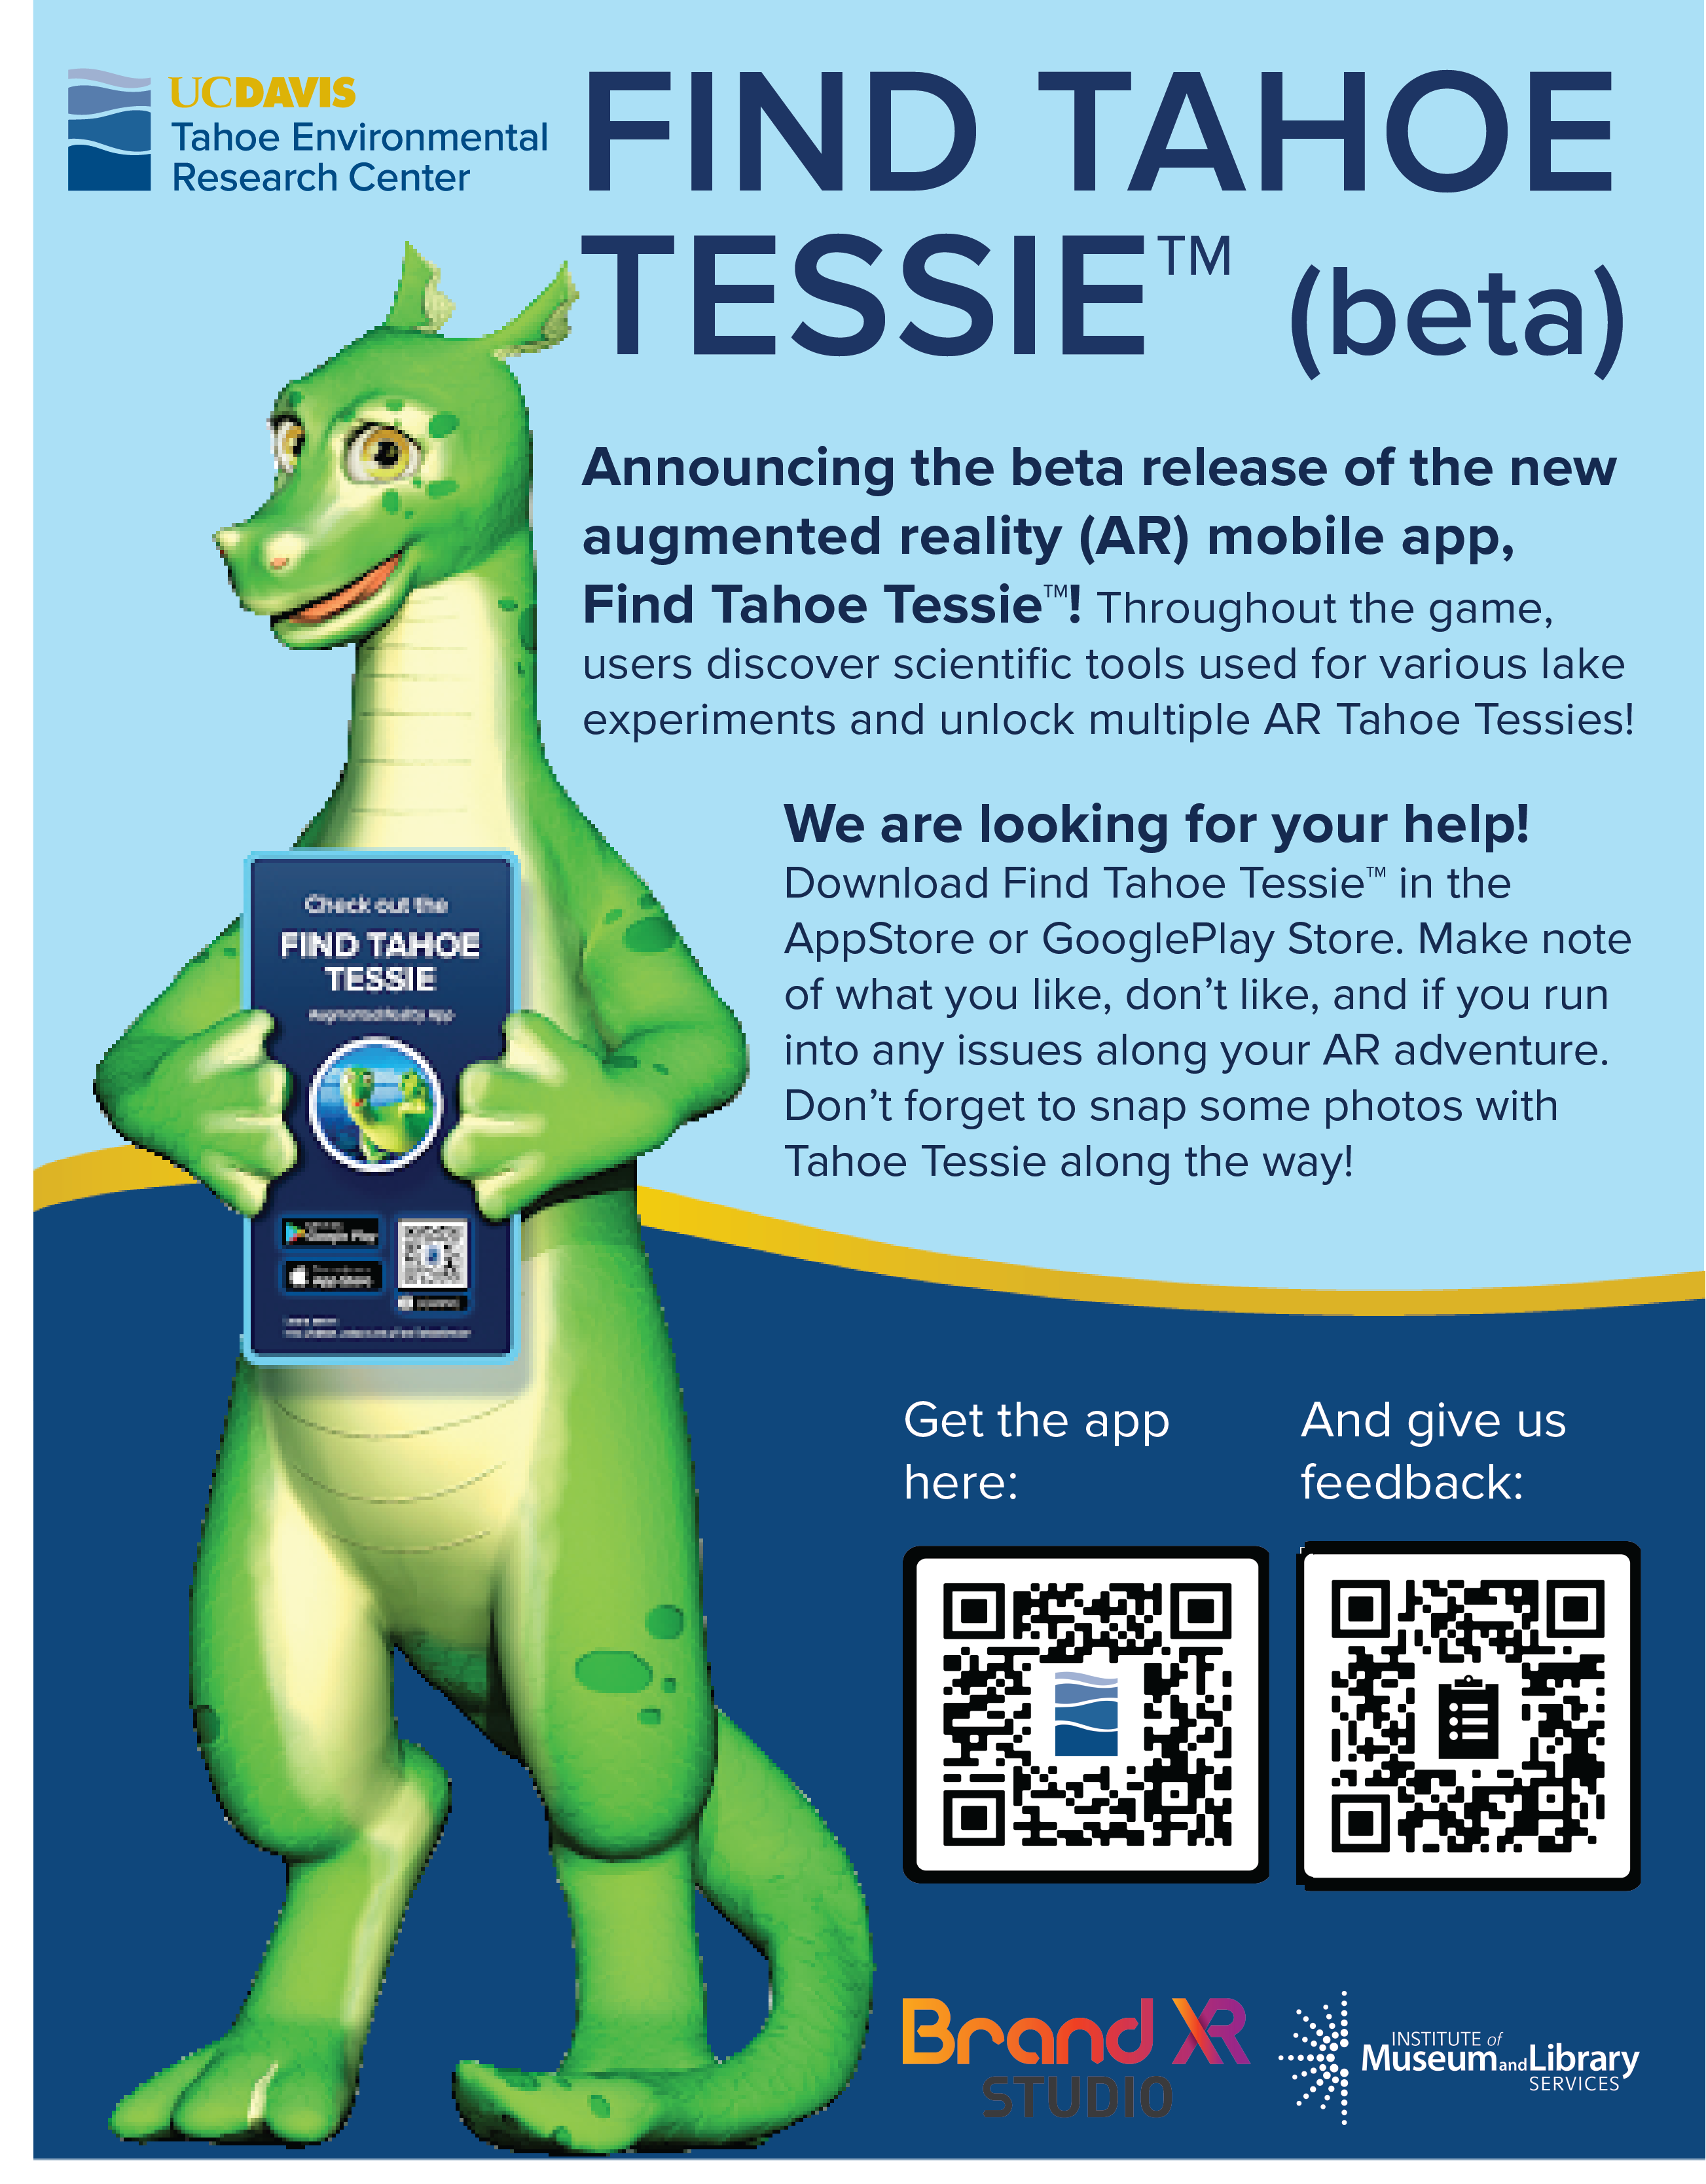 Beta Testers needed for Find Tahoe Tessie